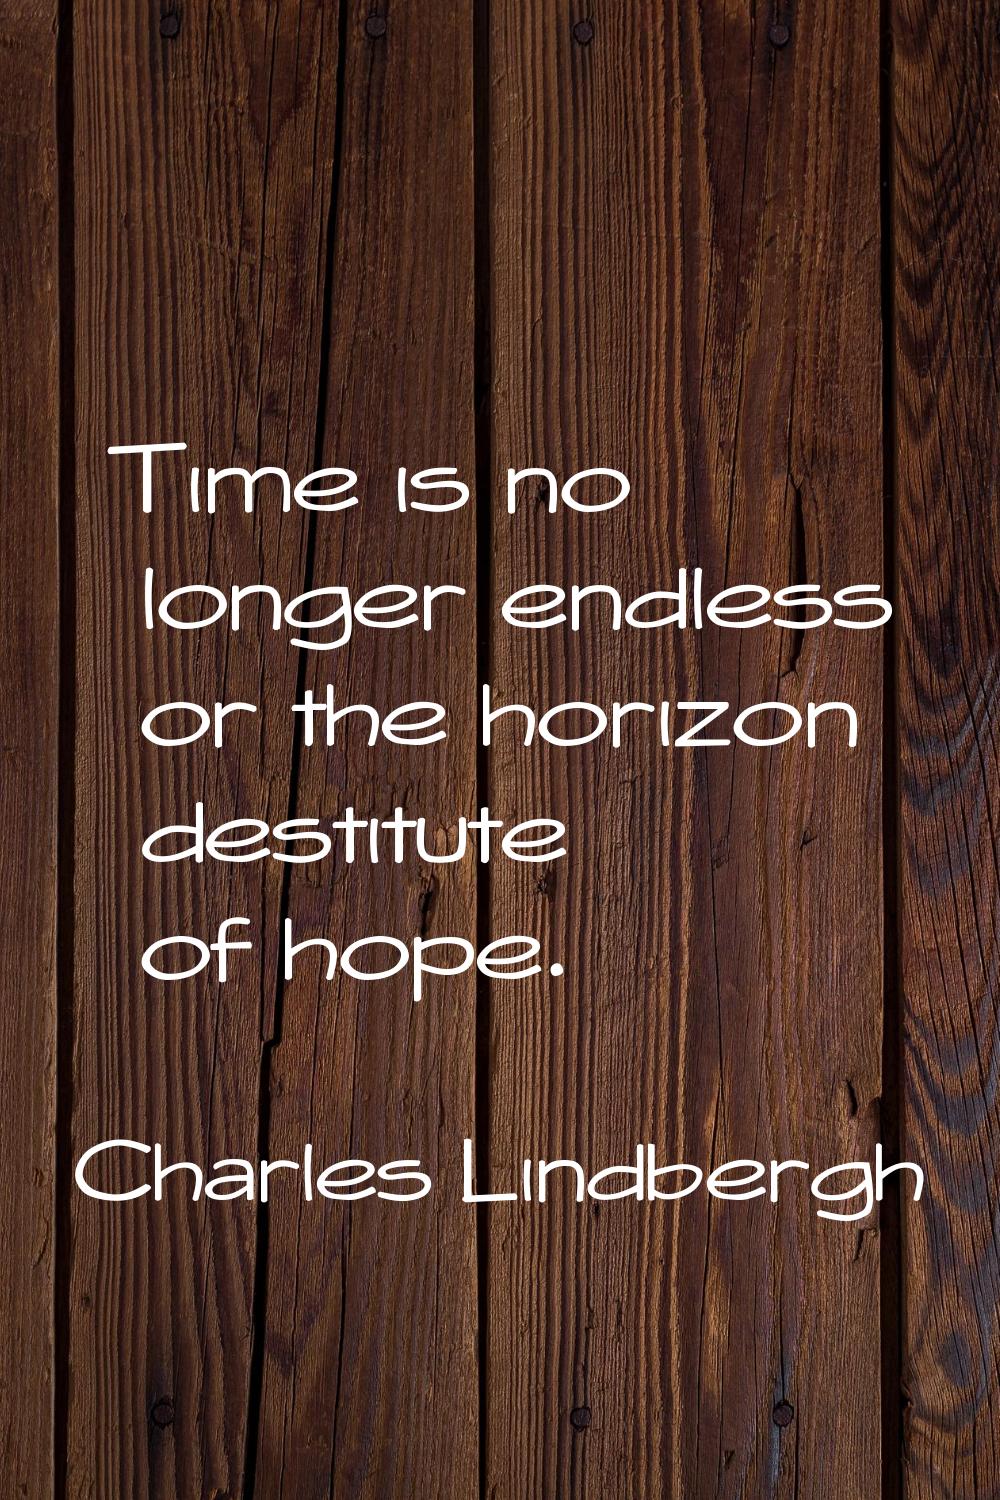 Time is no longer endless or the horizon destitute of hope.